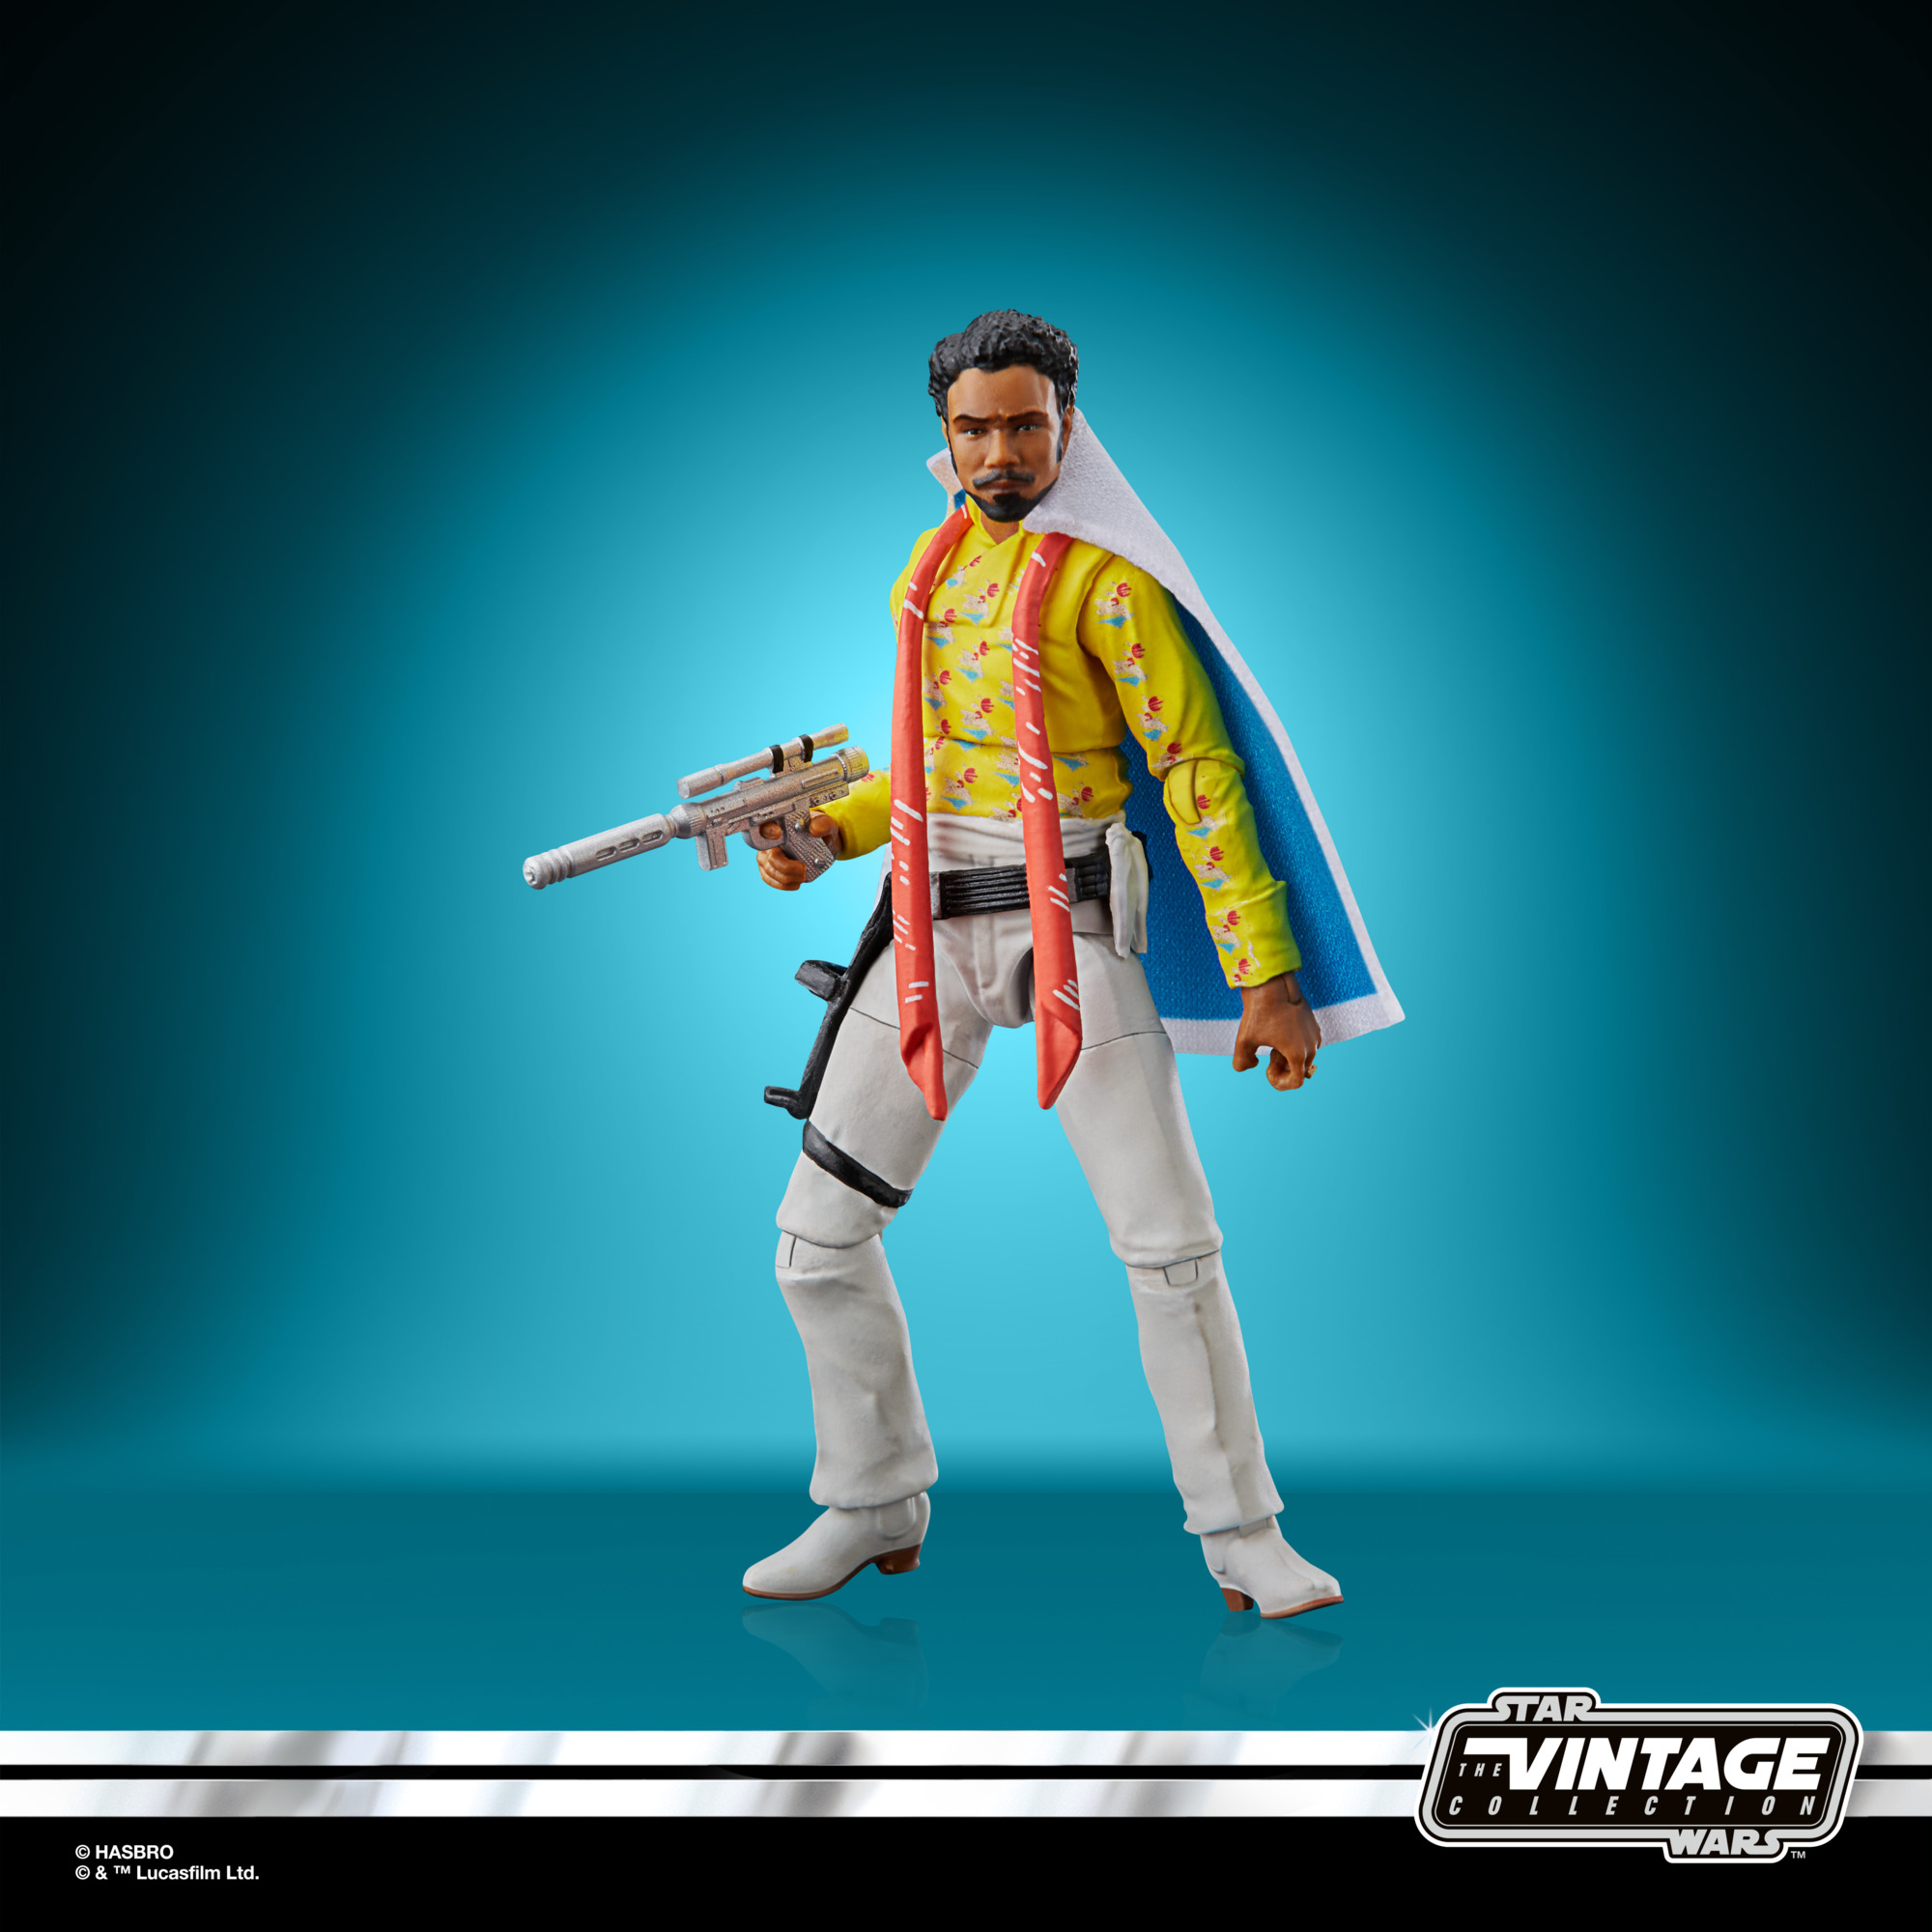 Star Wars The Vintage Collection Gaming Greats Lando Calrissian (Star Wars Battlefront II) F55575L00 5010993967810